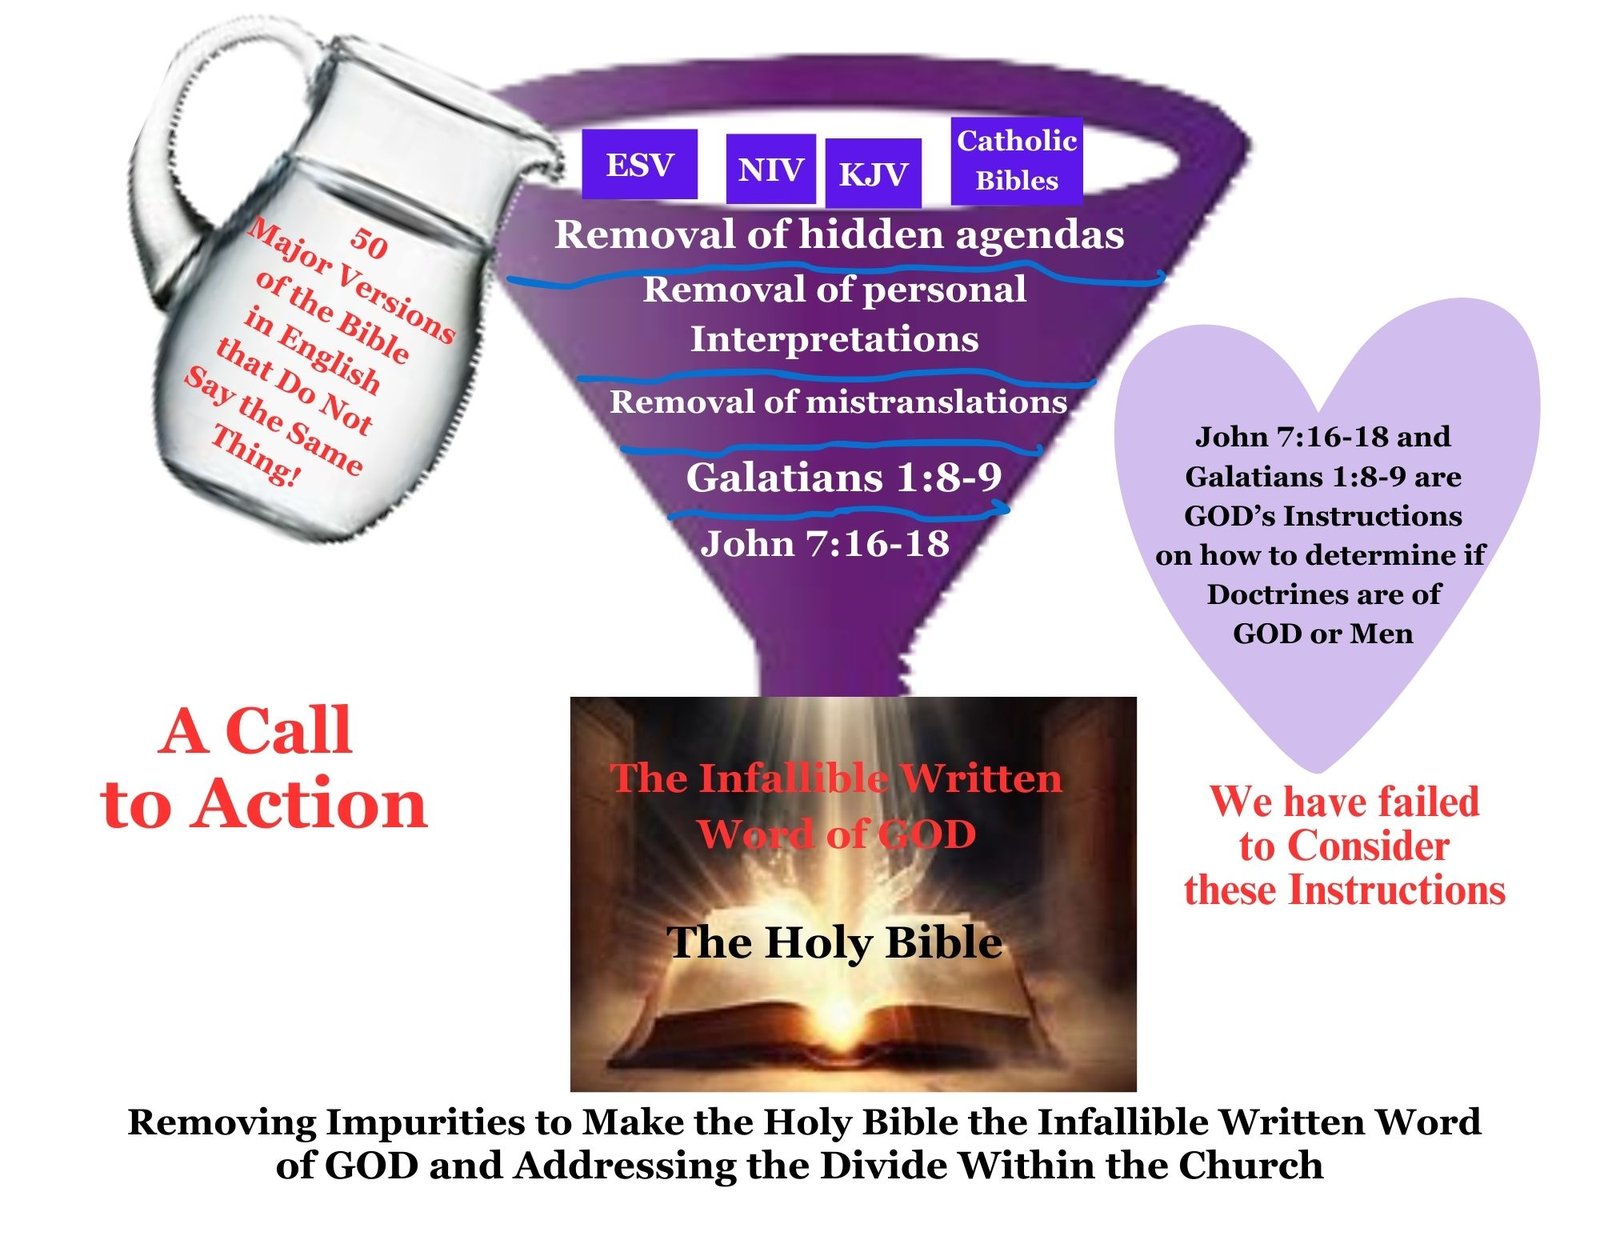 Removing Impurities to Make the Holy Bible the Infallible Written Word of GOD and Addressing the Divide Within the Church